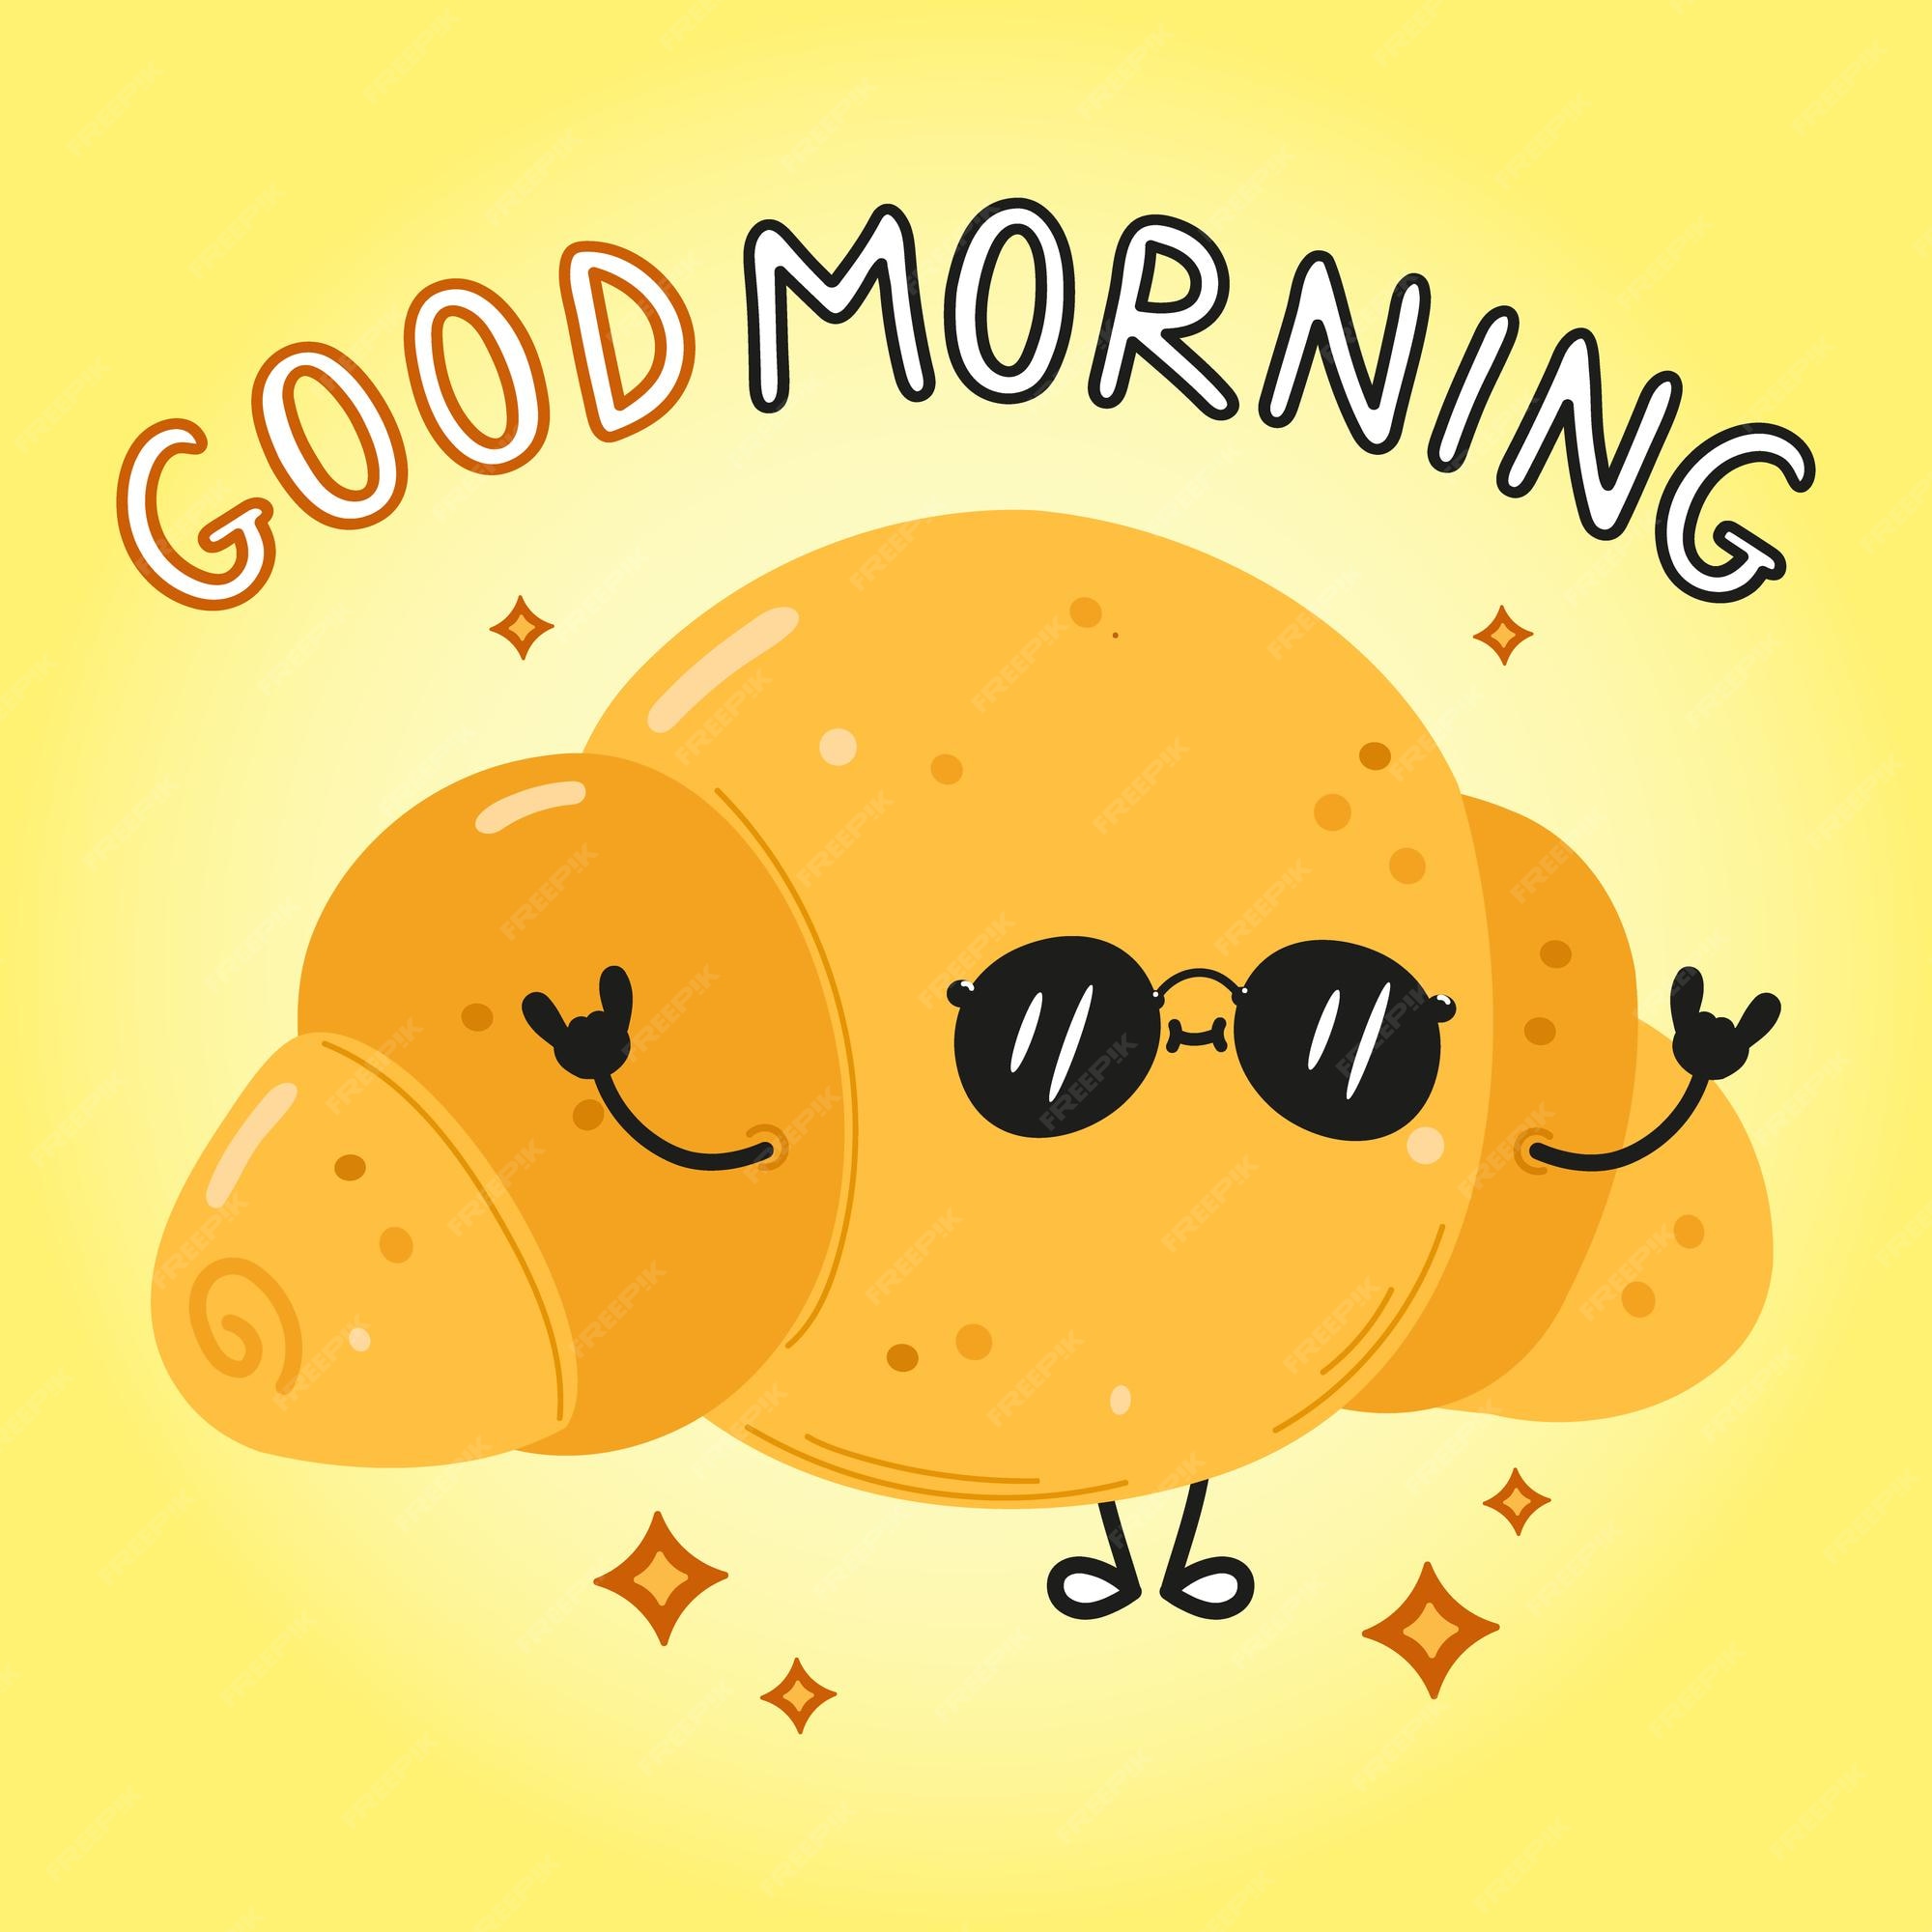 Good Morning funny, animated cards & memes